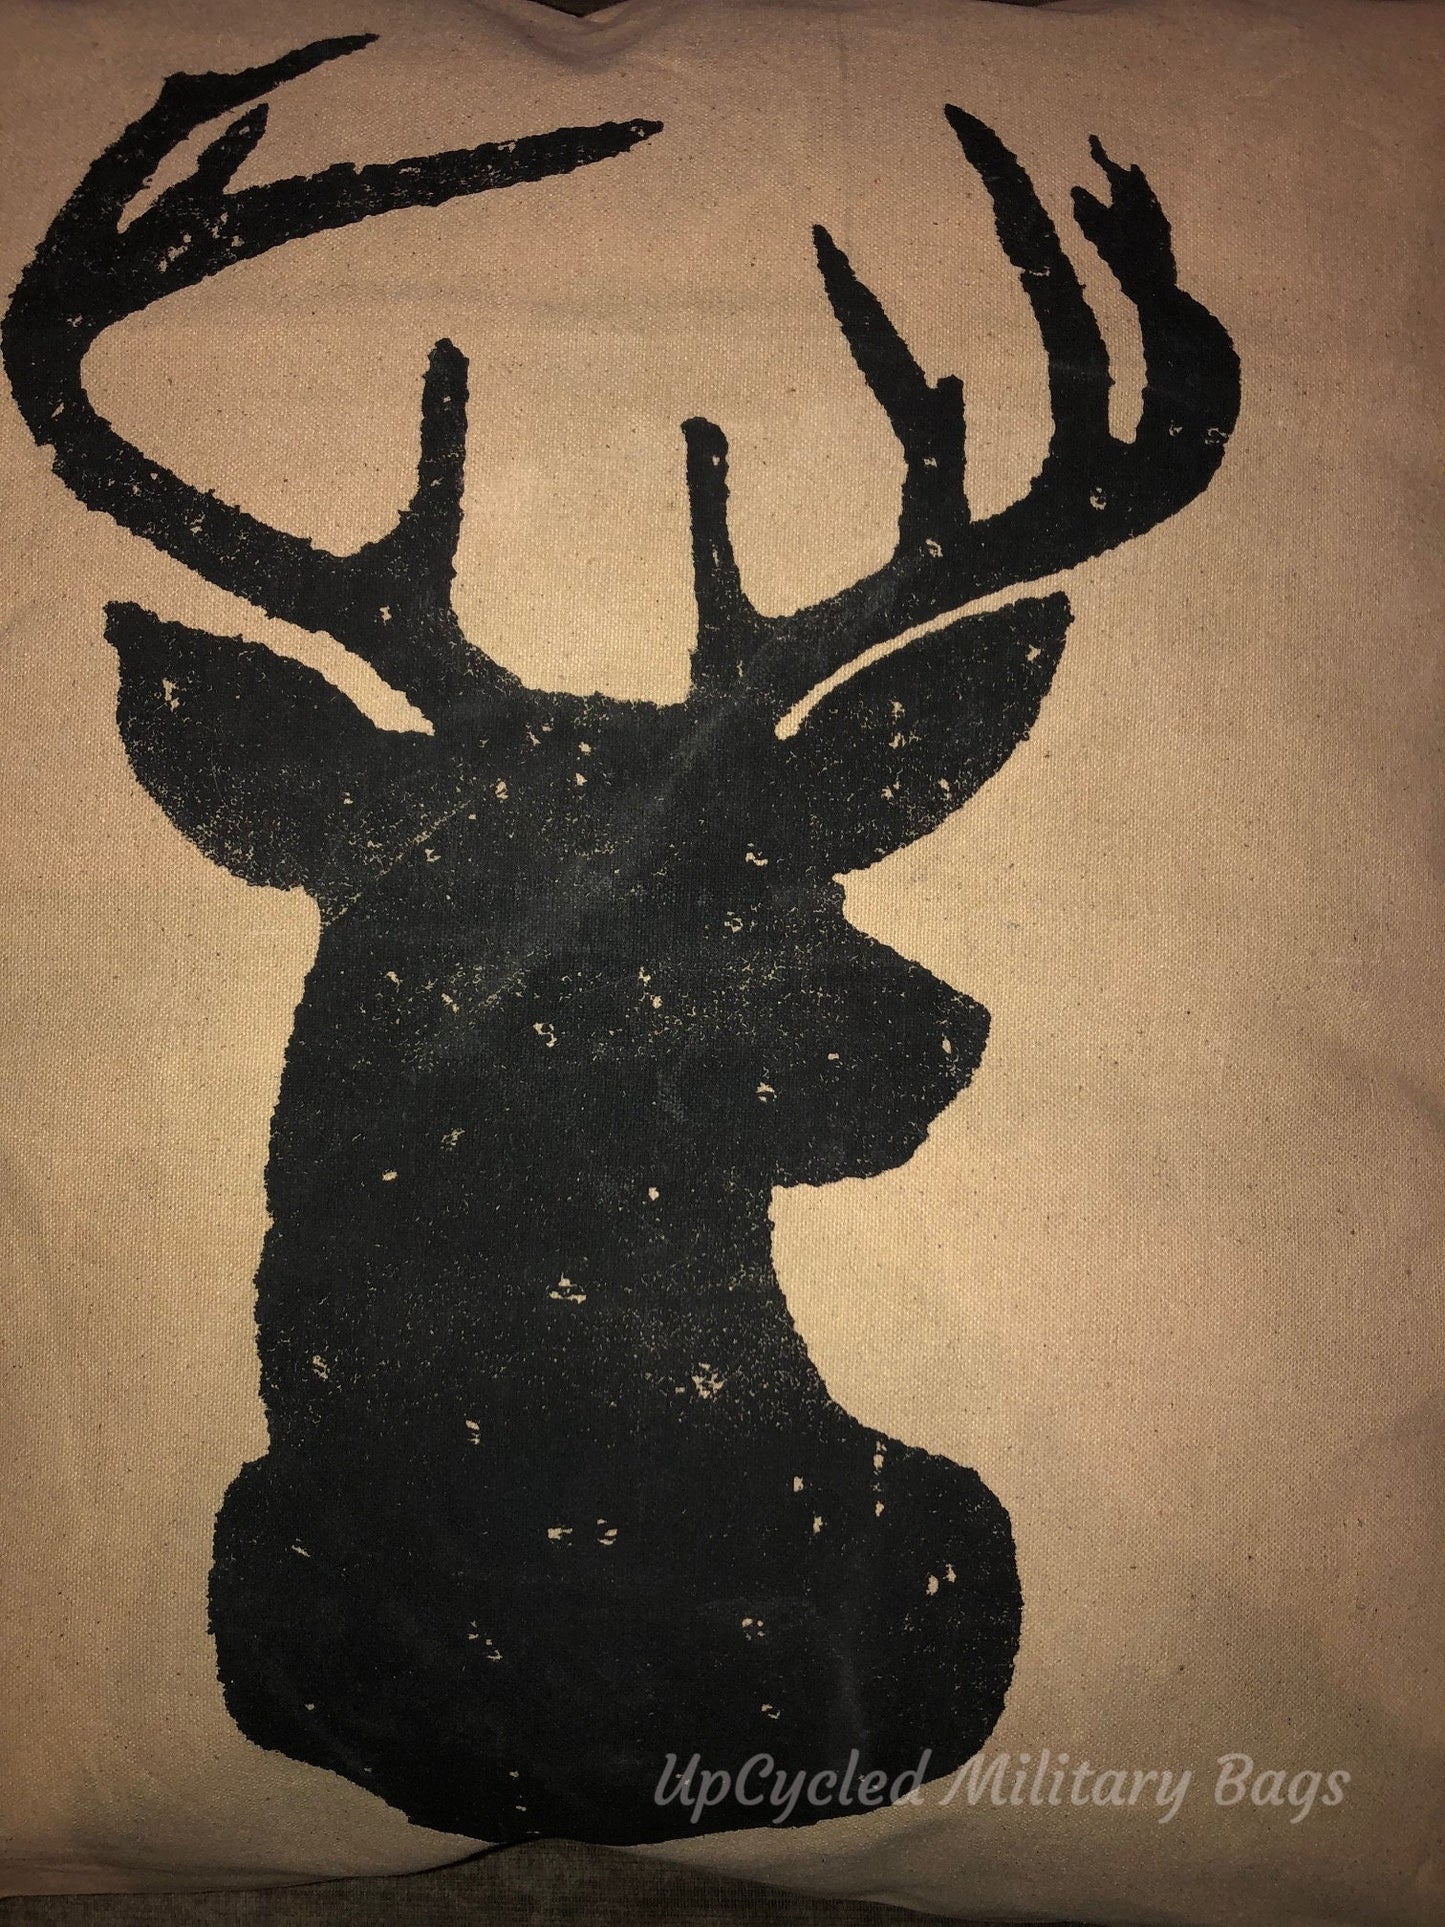 Buck Repurposed Military Canvas Deer Pillow Cover 20 x 20 Deer Silhouette Rustic Chic Farmhouse Decor Accent Antlers Throw Pillow